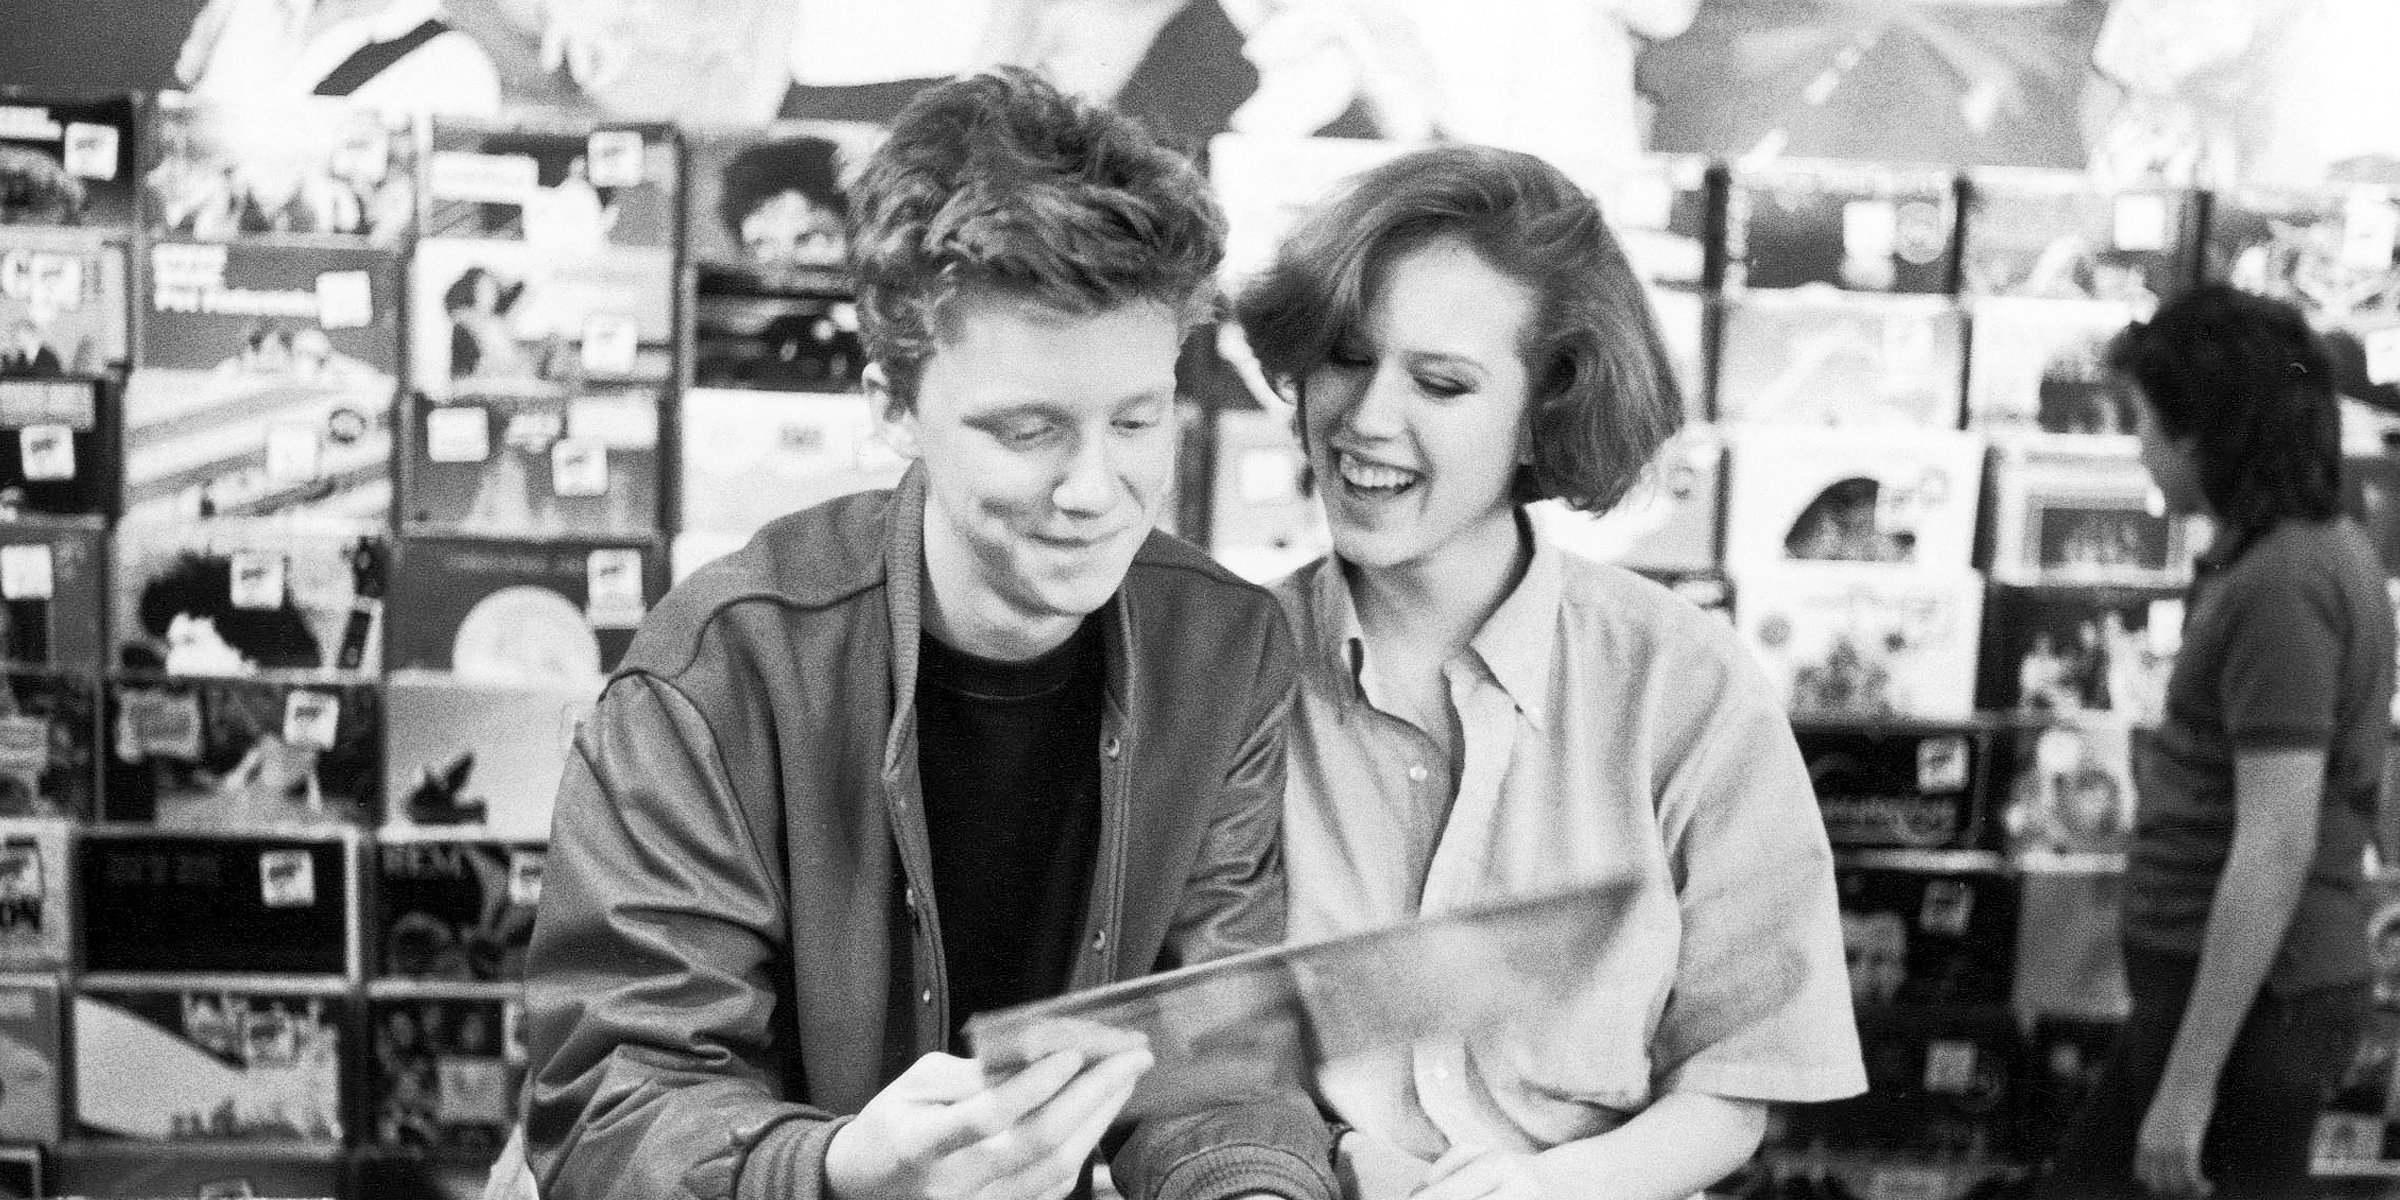 Molly Ringwald and Anthony Michael Hall | Source: Getty Images